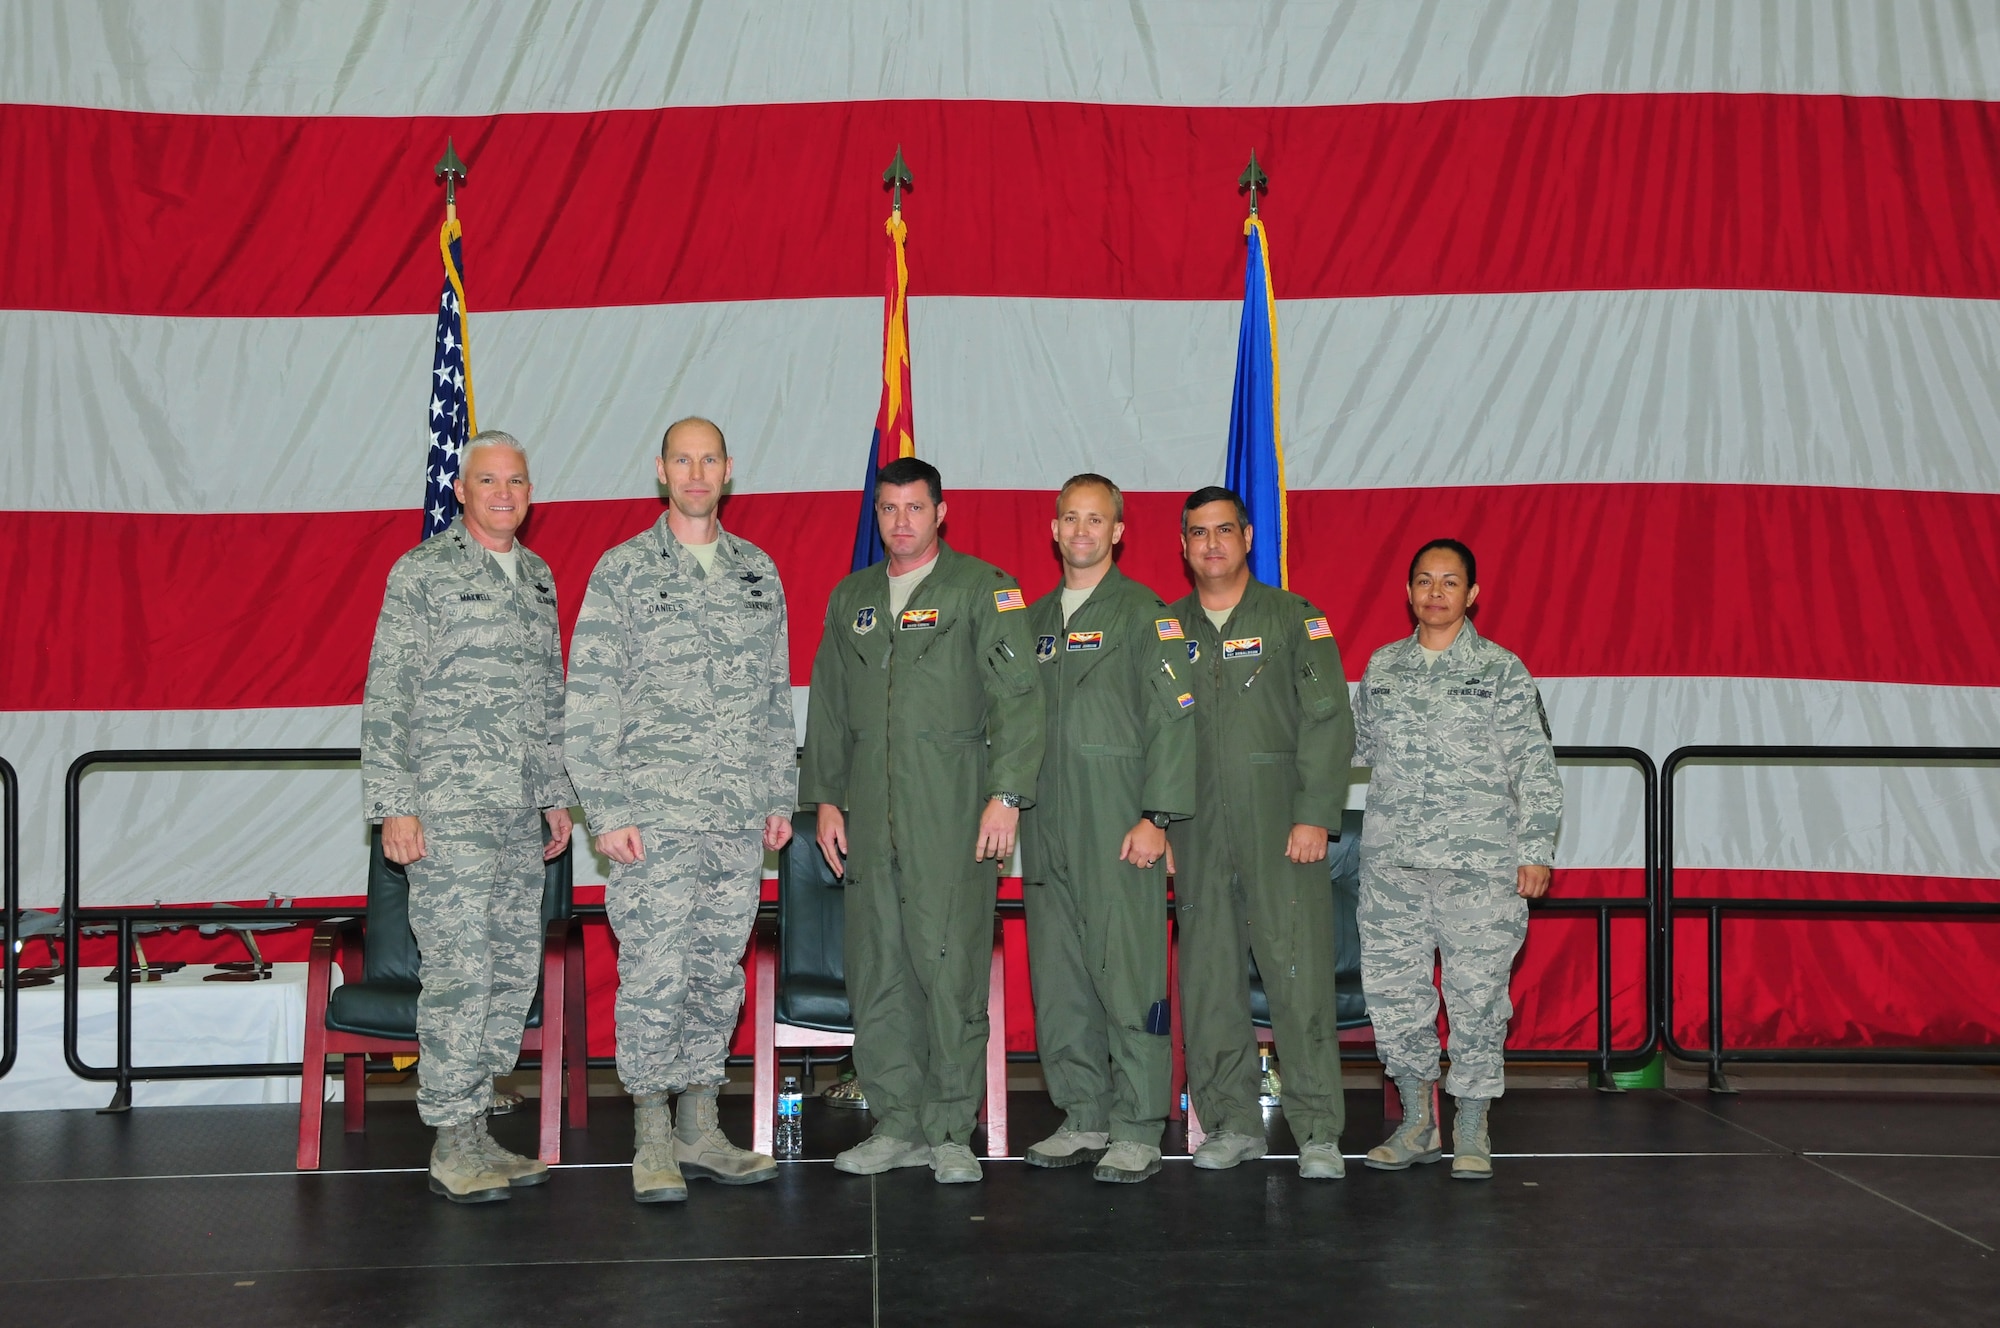 Air Forces Central Command’s Aircrew of the Year Award recipients were recognized at the 161st Air Refueling Wing annual awards ceremony March 6, 2016, Phoenix Sky Harbor Air National Guard Base. This year’s recipients from left to right: Maj. Gen. Edward Maxwell, Arizona Air National Guard commander, Col. Troy Daniels, 161st Air Refueling Wing commander, Maj. David Kierein, Capt. Brodie Johnson Col. Patrick Donaldson, operations group commander, and Chief Master Sgt. Martha Garcia, 161st Air Refueling Wing command chief. (U. S. Air National Guard photo by Master Sgt. Kelly M. Deitloff/Released)